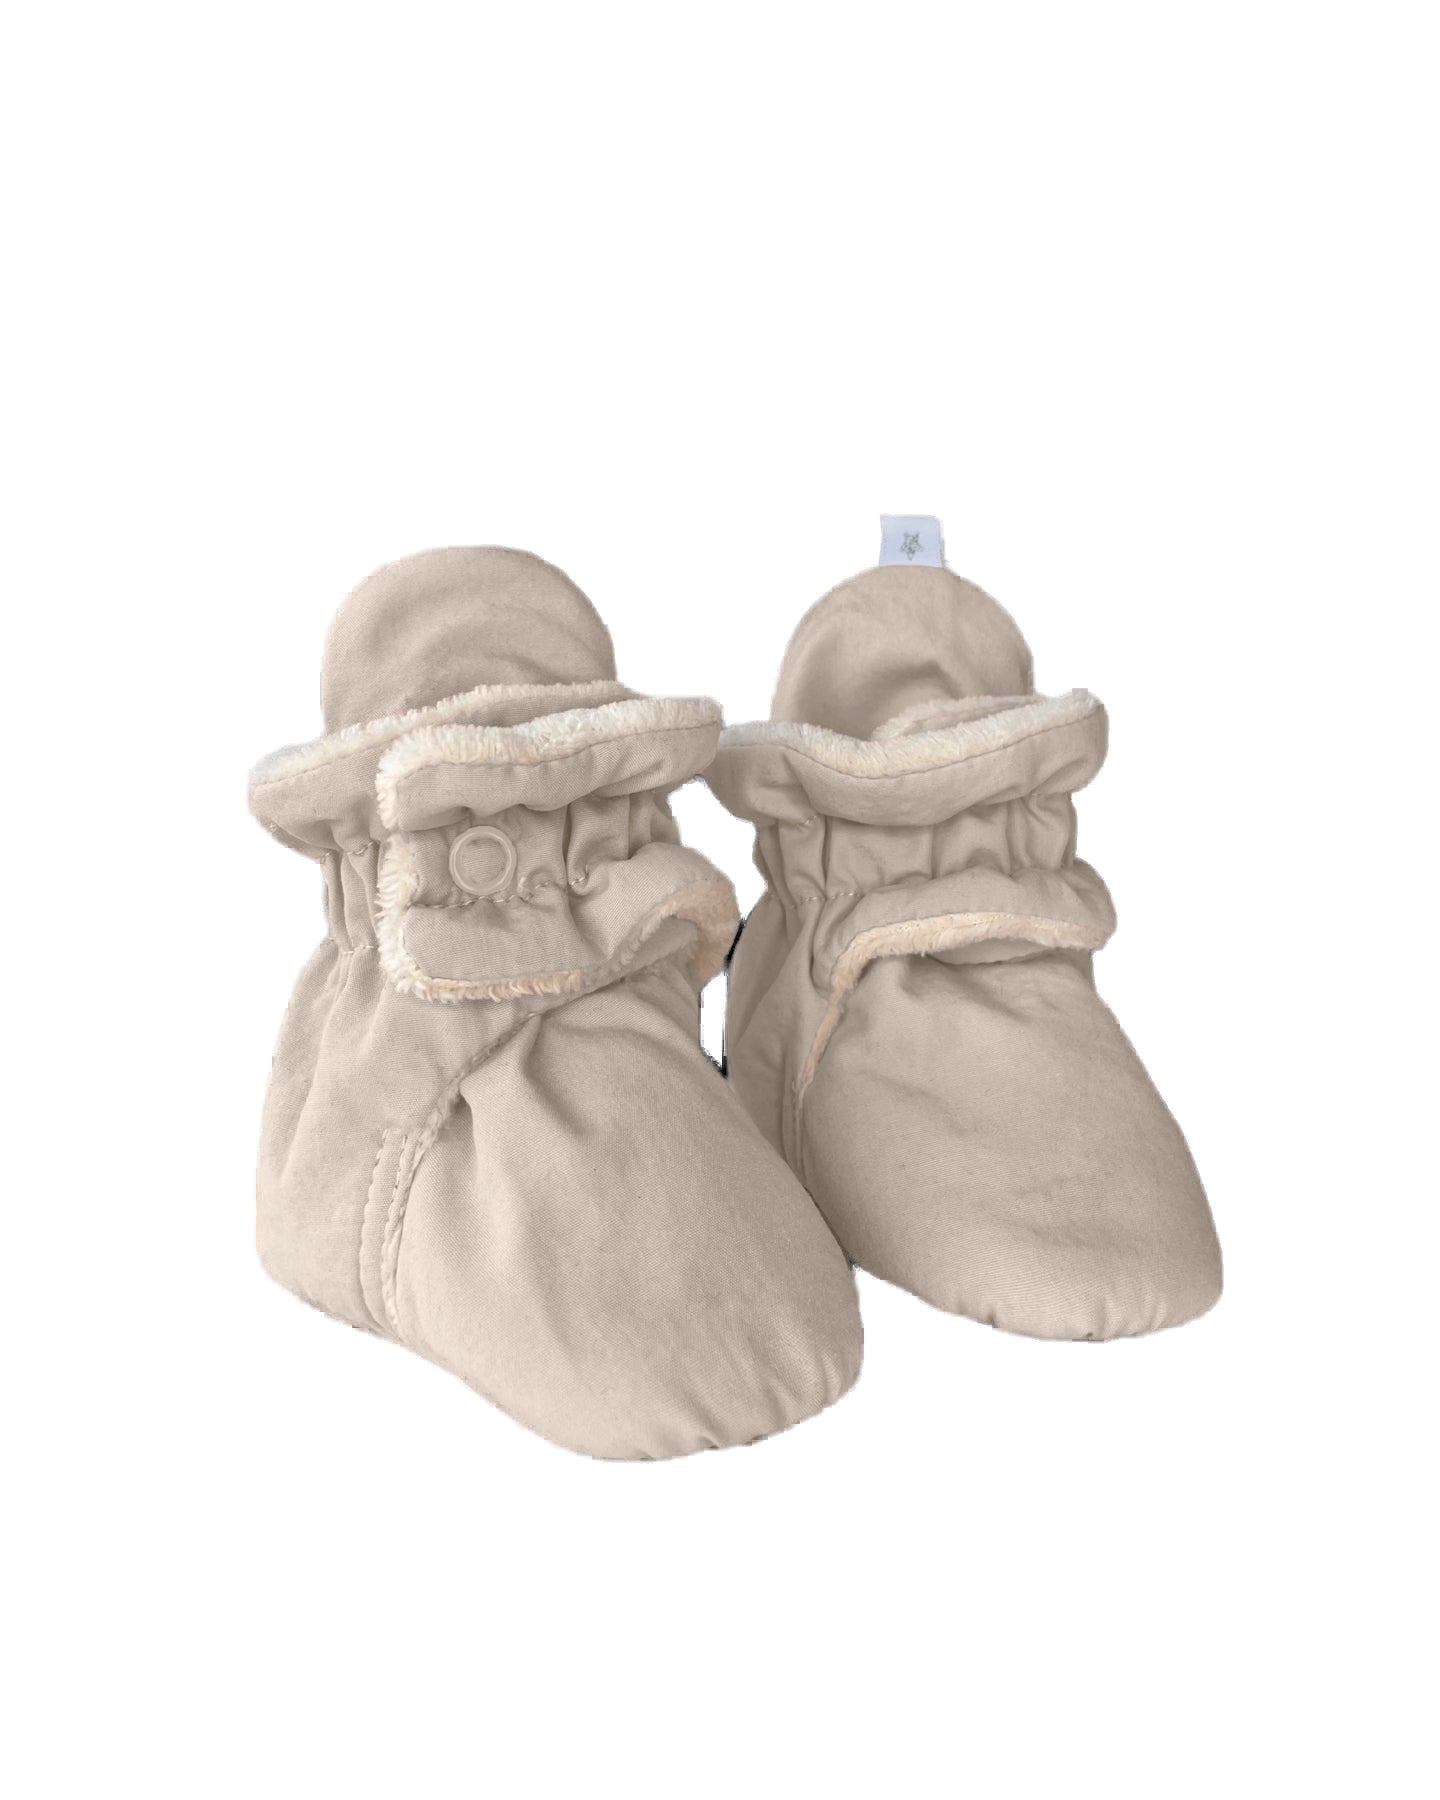 Baby Bootie Slippers - Airy